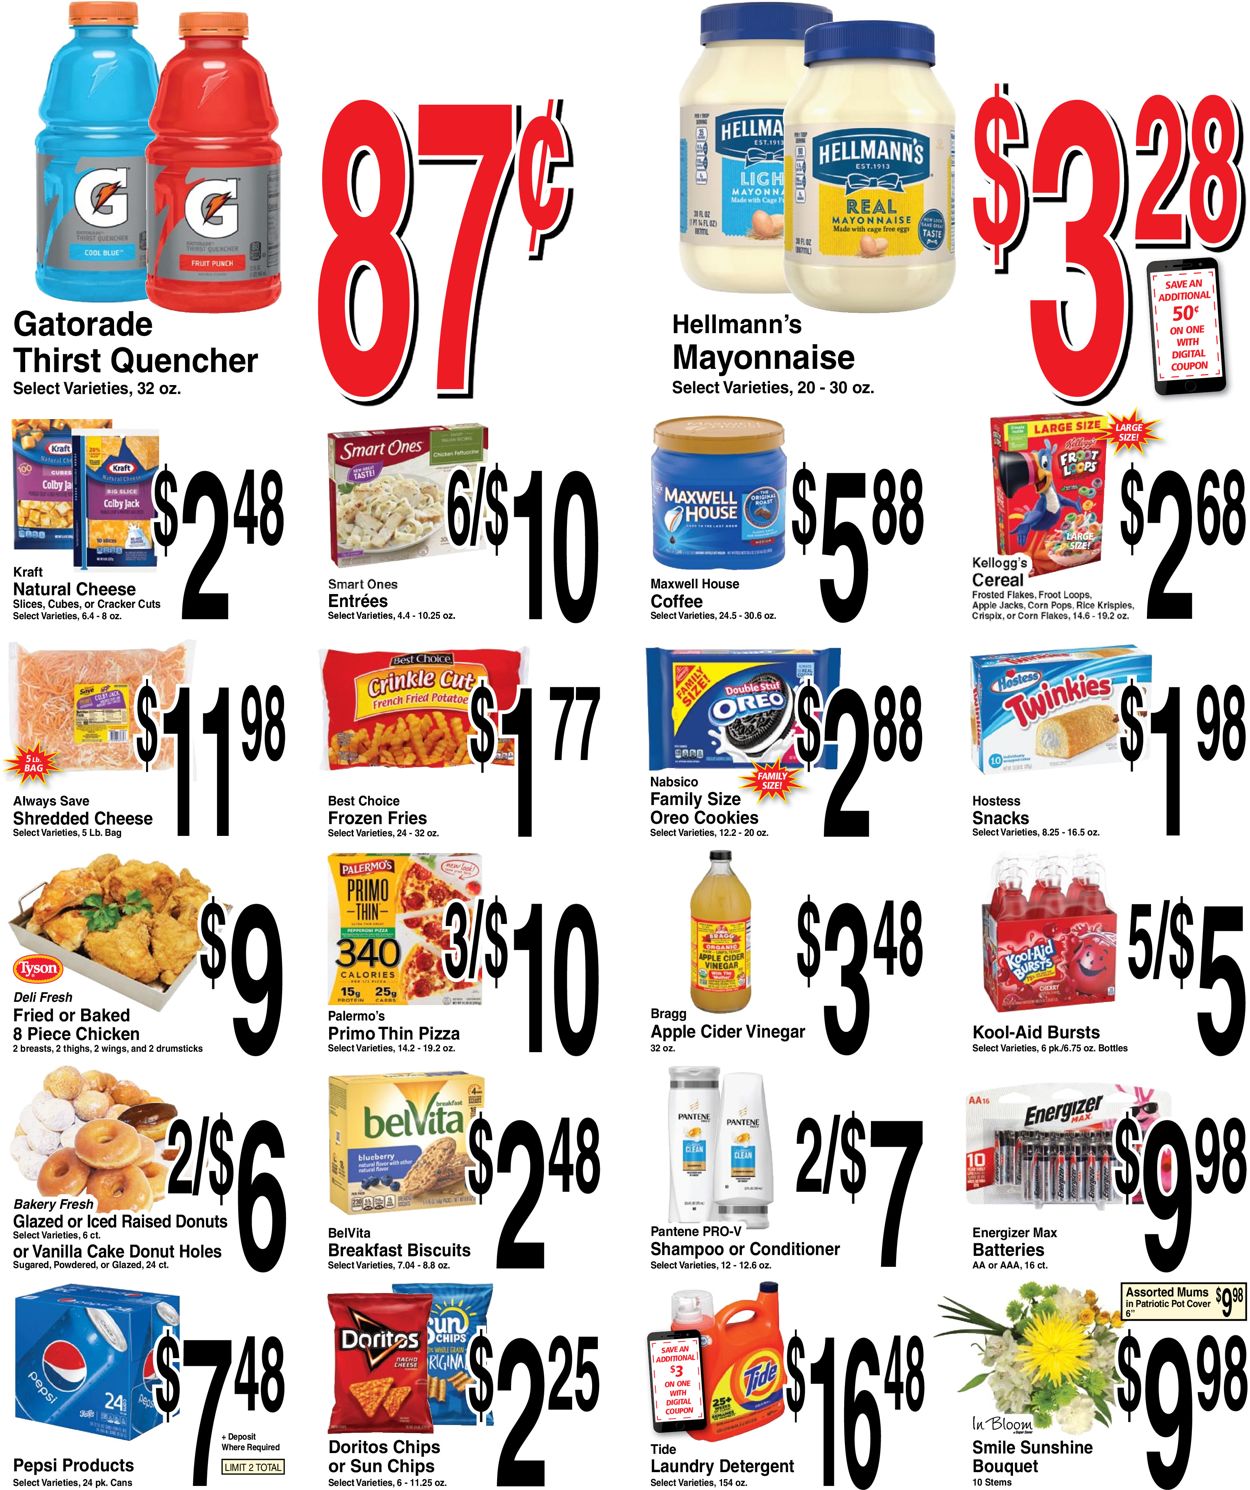 Super Saver Ad from 05/19/2021